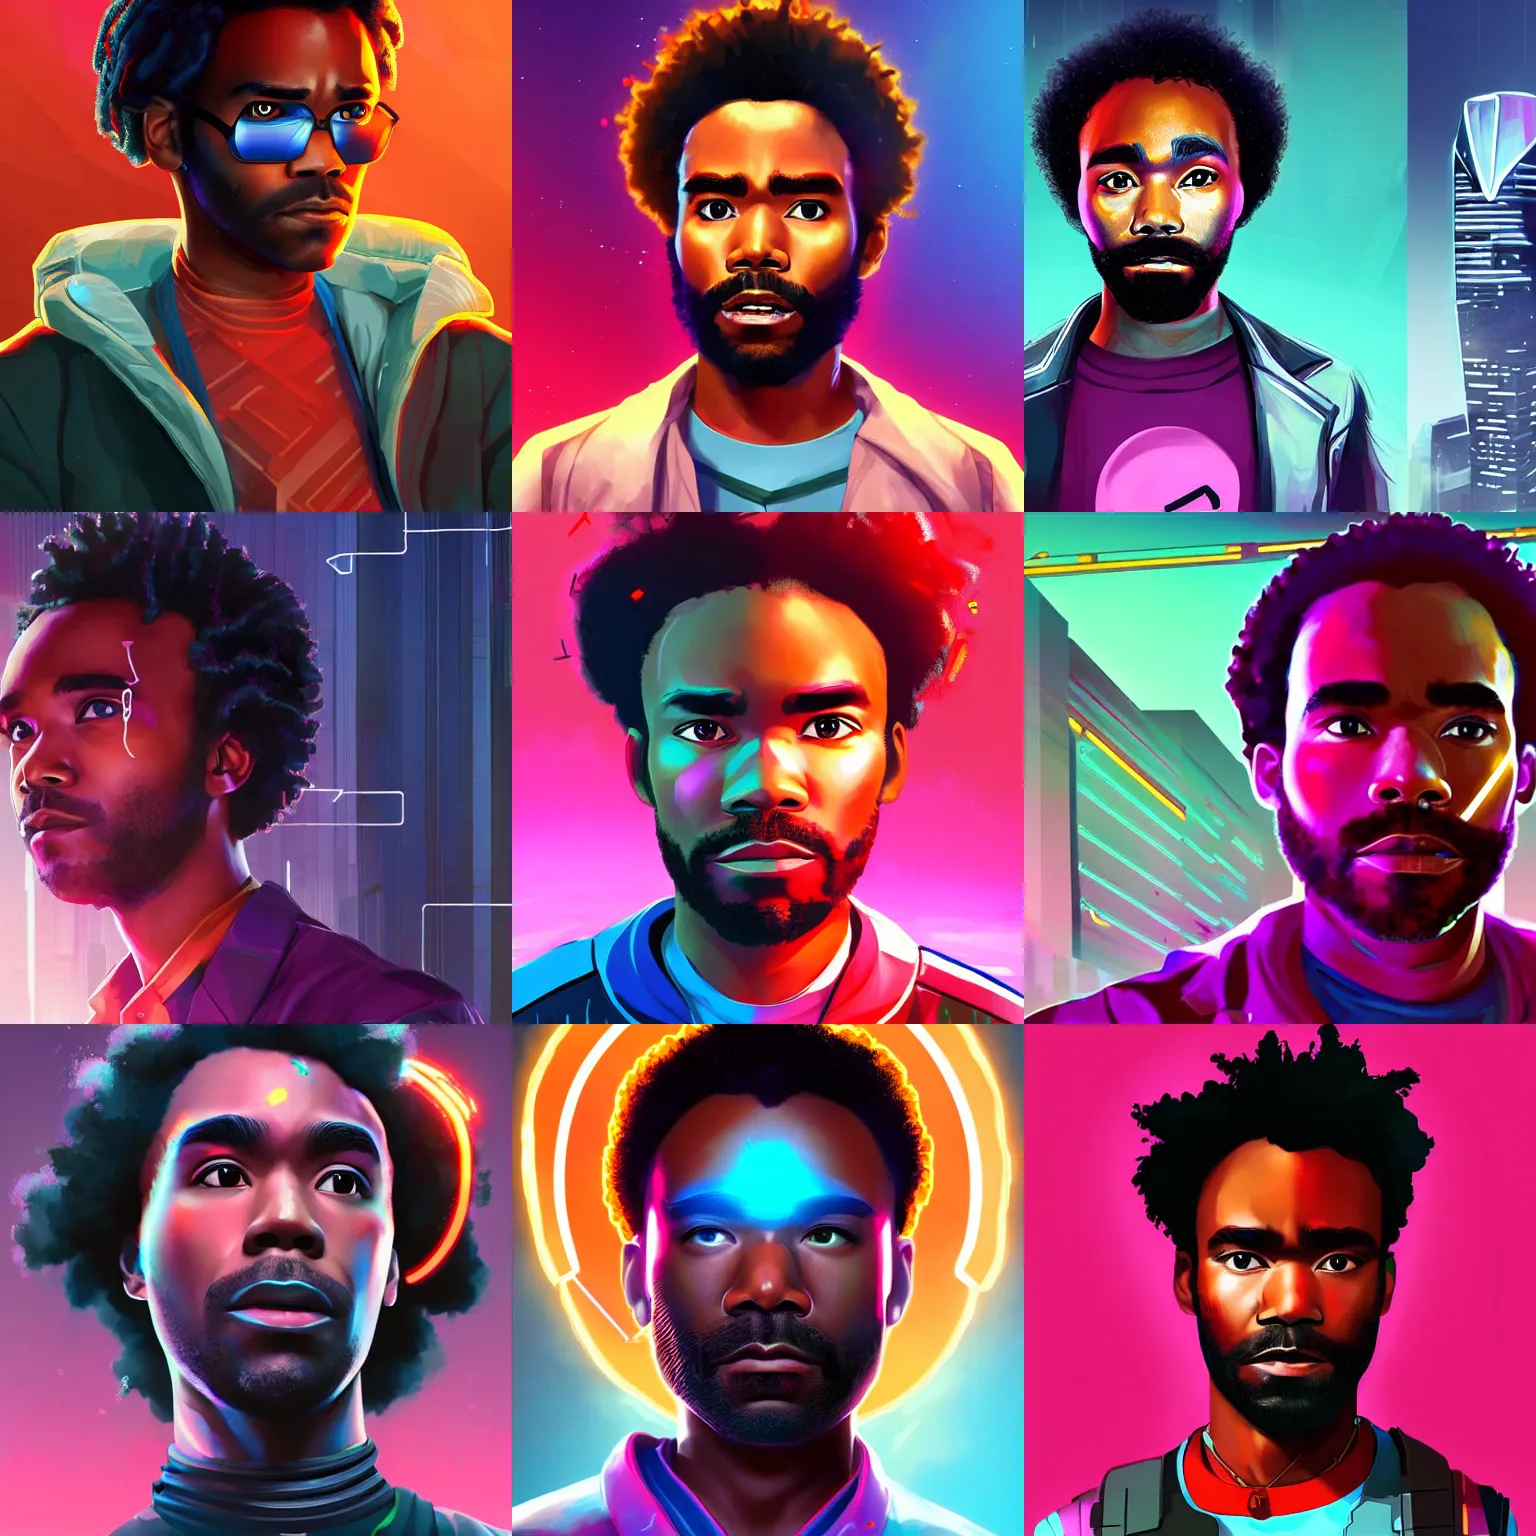 Prompt: a cyberpunk donald glover as troy barnes from community, short hair, a character portrait, synthwave by art artgerm, cg society contest winner, shock art, sci - fi, artstation hq, speedpainting